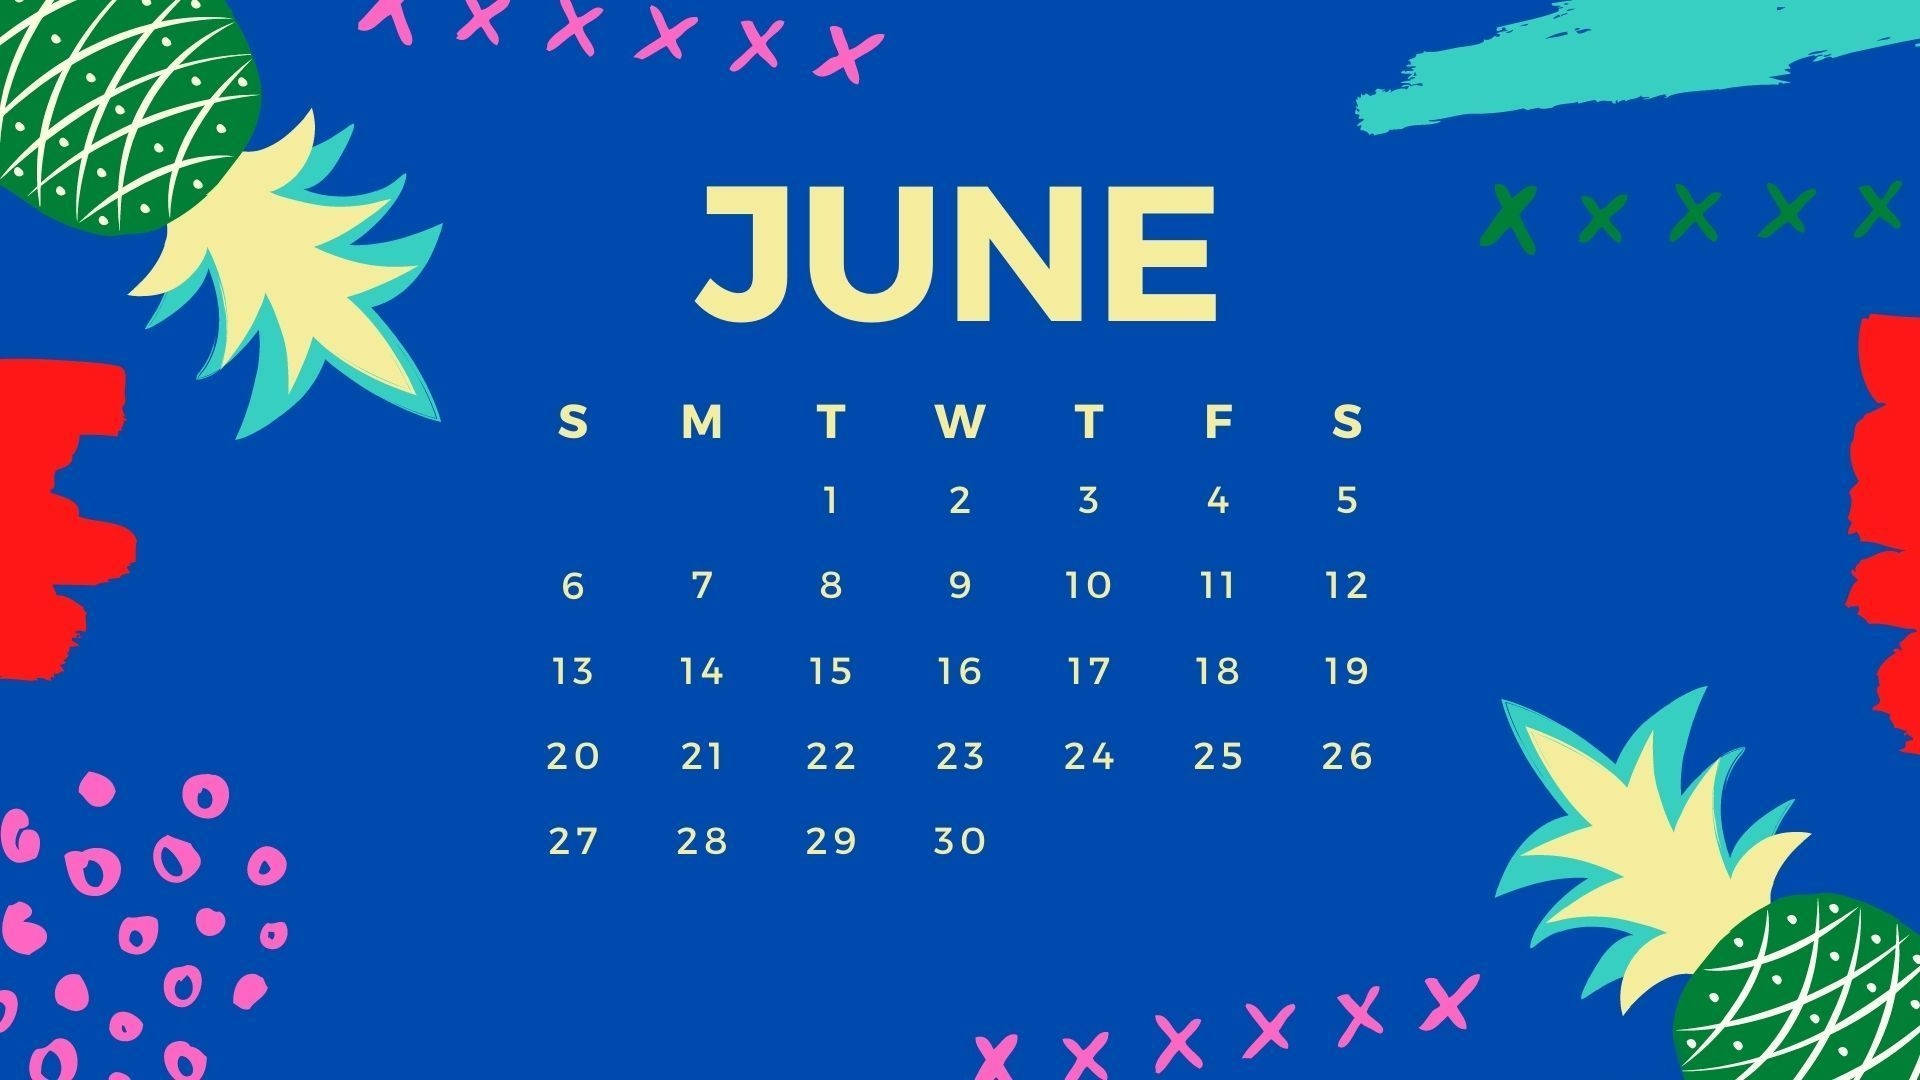 June Calendar With Pineapples And Colorful Designs Wallpaper